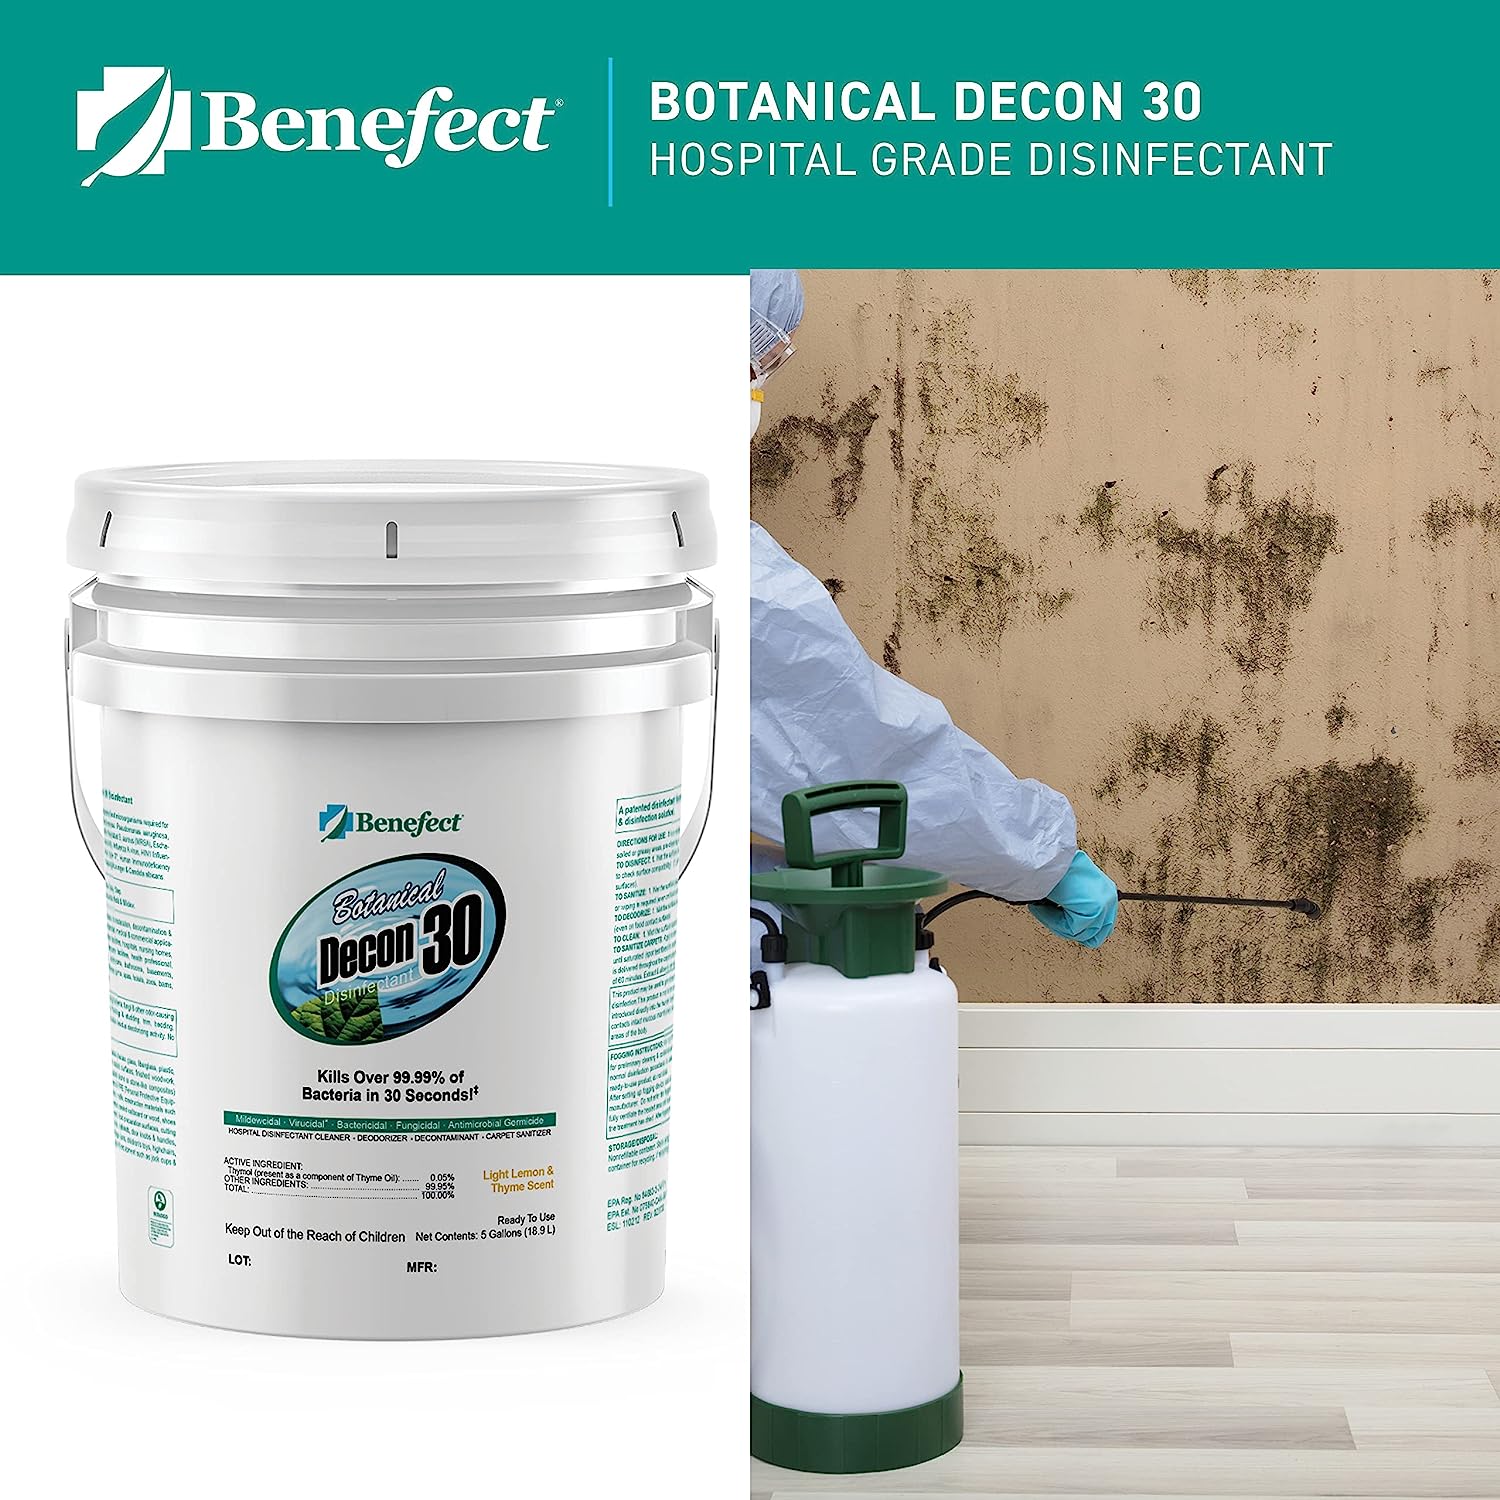 Benefect Botanical Decon 30 Disinfectant Cleaner PURELY PLANT-BASED: Benefect's complete range is infused with botanical ingredients, eschewing harsh or synthetic chemicals. The EPA acknowledges these products for posing no known risks to human health or the environment. ELIMINATES 99.99% OF MICROBES in a mere 30 seconds, making it the ideal solution for high-traffic areas like countertops, children’s toys, cutting boards, and more. This leaves a gentle whisper of lemon and thyme aroma behind. TRUSTED & RELIABLE: Benefect Decon 30 ensures safe use on food-contact surfaces without the need for subsequent rinsing or wiping. It stands as the top pick for managing water damage in the kitchen or tackling a school virus outbreak. USER-FRIENDLY: Comes as a ready-to-use solution, with no need for mixing or diluting. Proudly certified as 100% biobased by the USDA BioPreferred Program and carries the UL EcoLogo Certification. WHERE SAFETY & EFFICACY ARE PARAMOUNT, Benefect is the trusted choice for restoration and remediation professionals. Note: These products may require additional shipping costs depending on shipping address. You will receive an email if any shipping needs to be added. You are not obligated to proceed with order if shipping doesn't work for you.